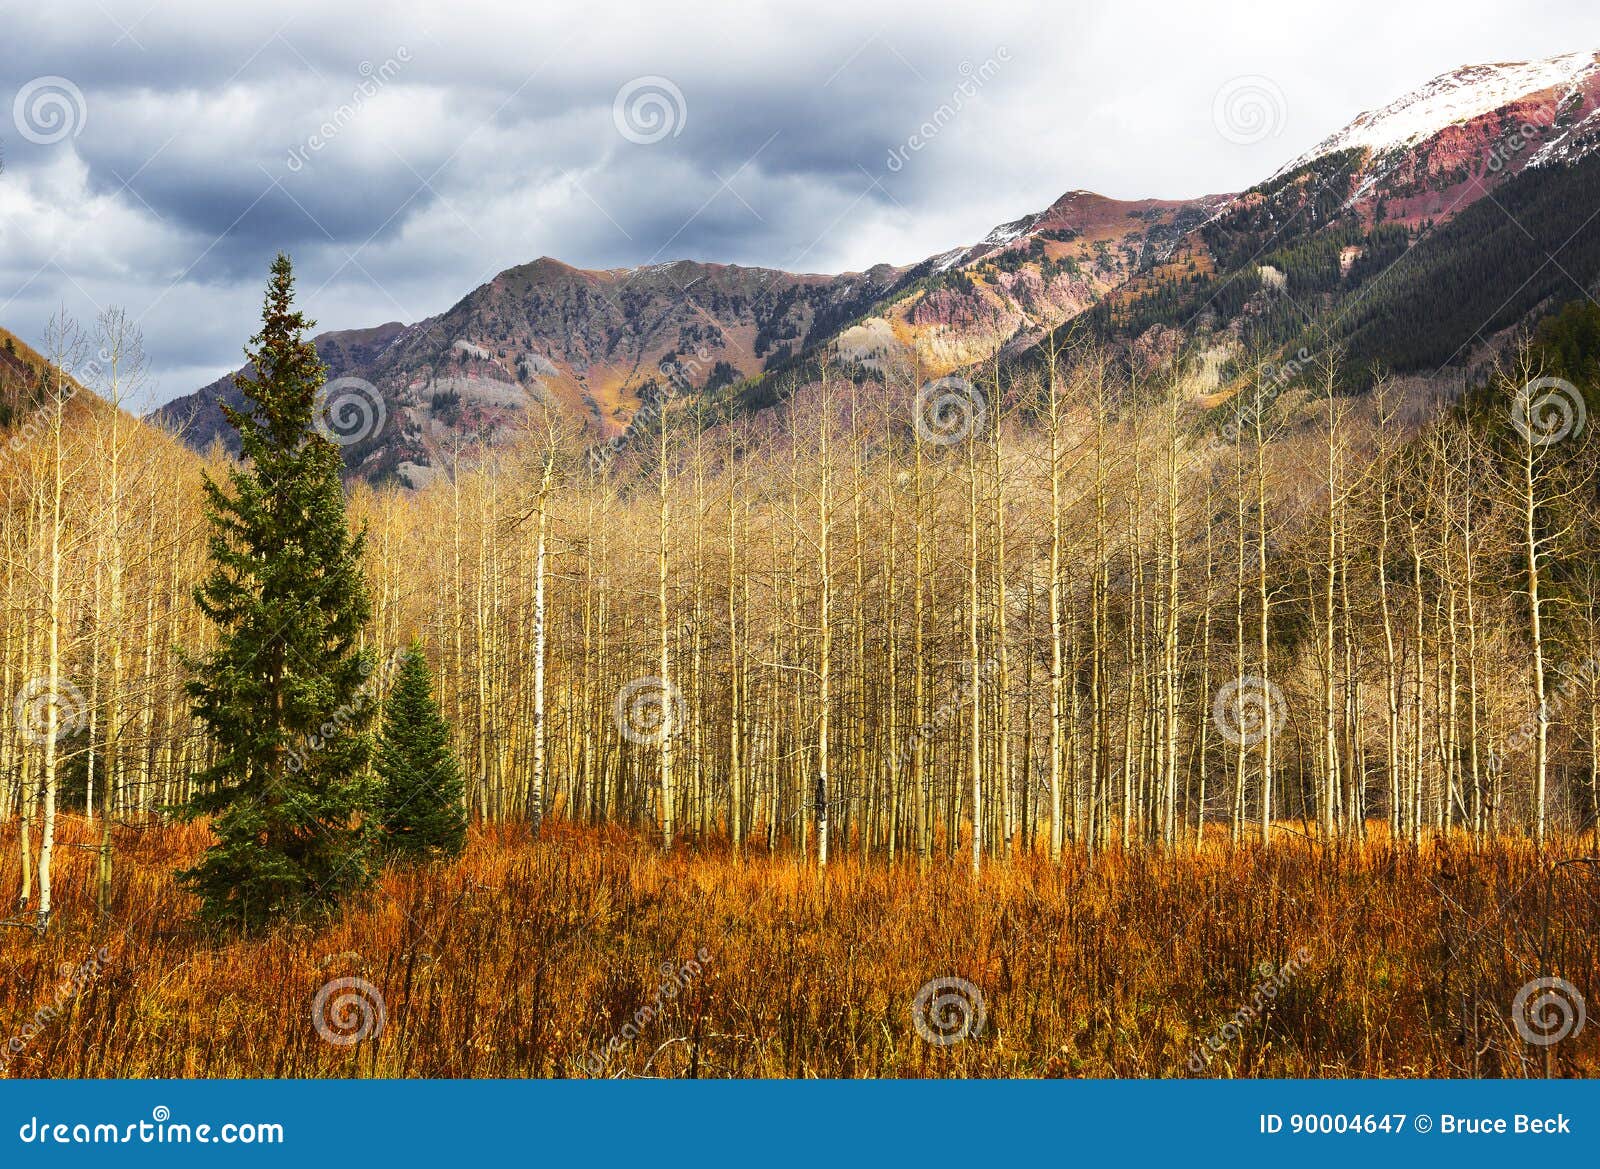 two evergreens and aspens